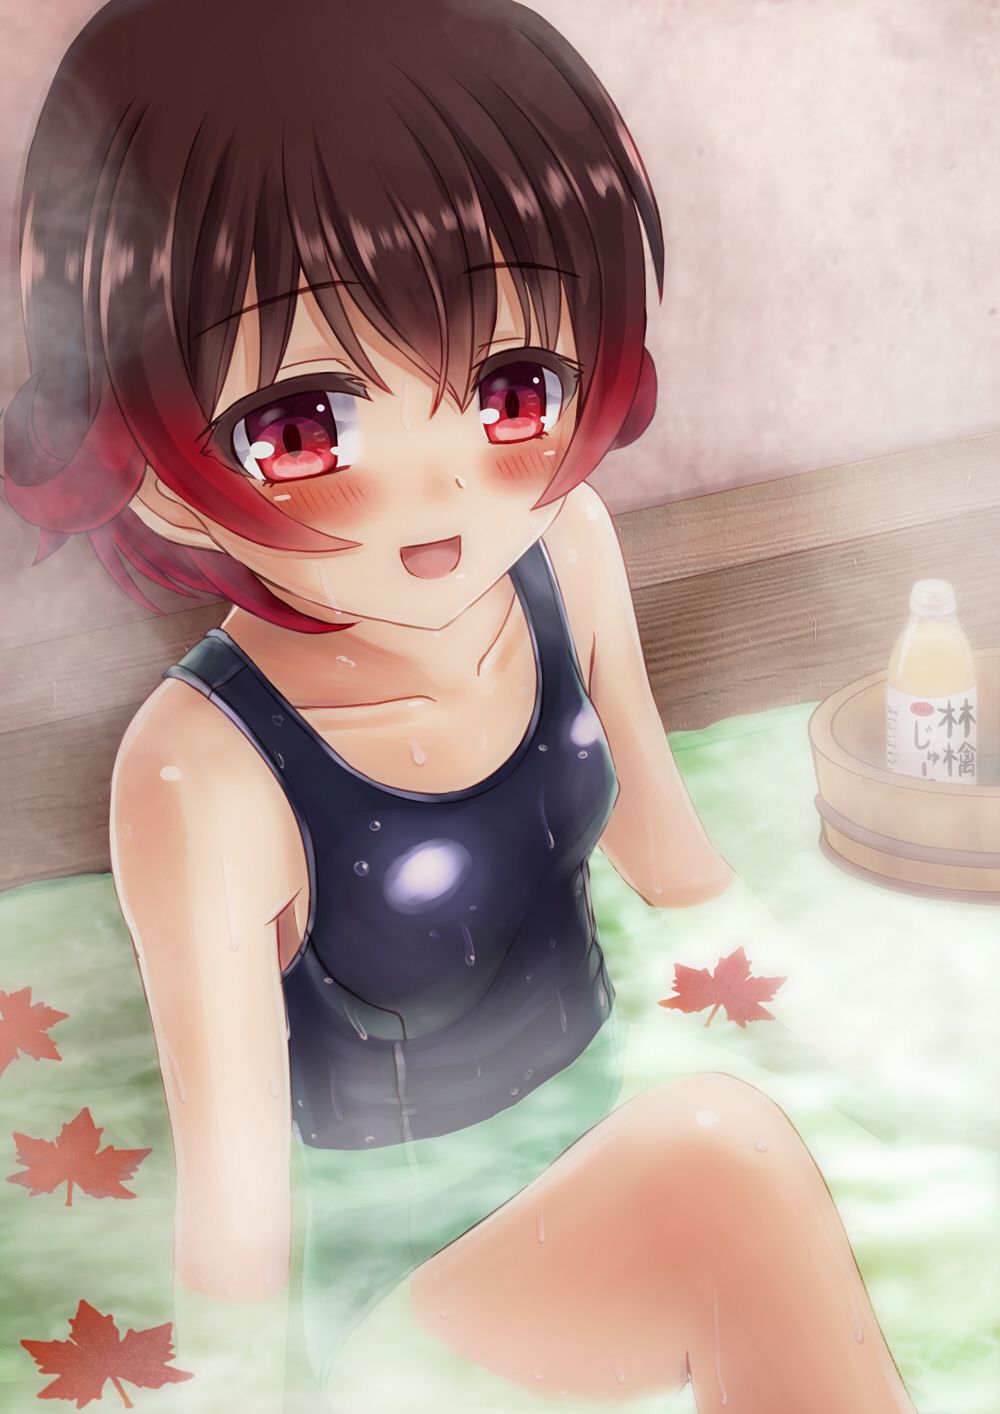 Summary the image you want to warm up (secondary-ZIP) pretty girls in bath 2